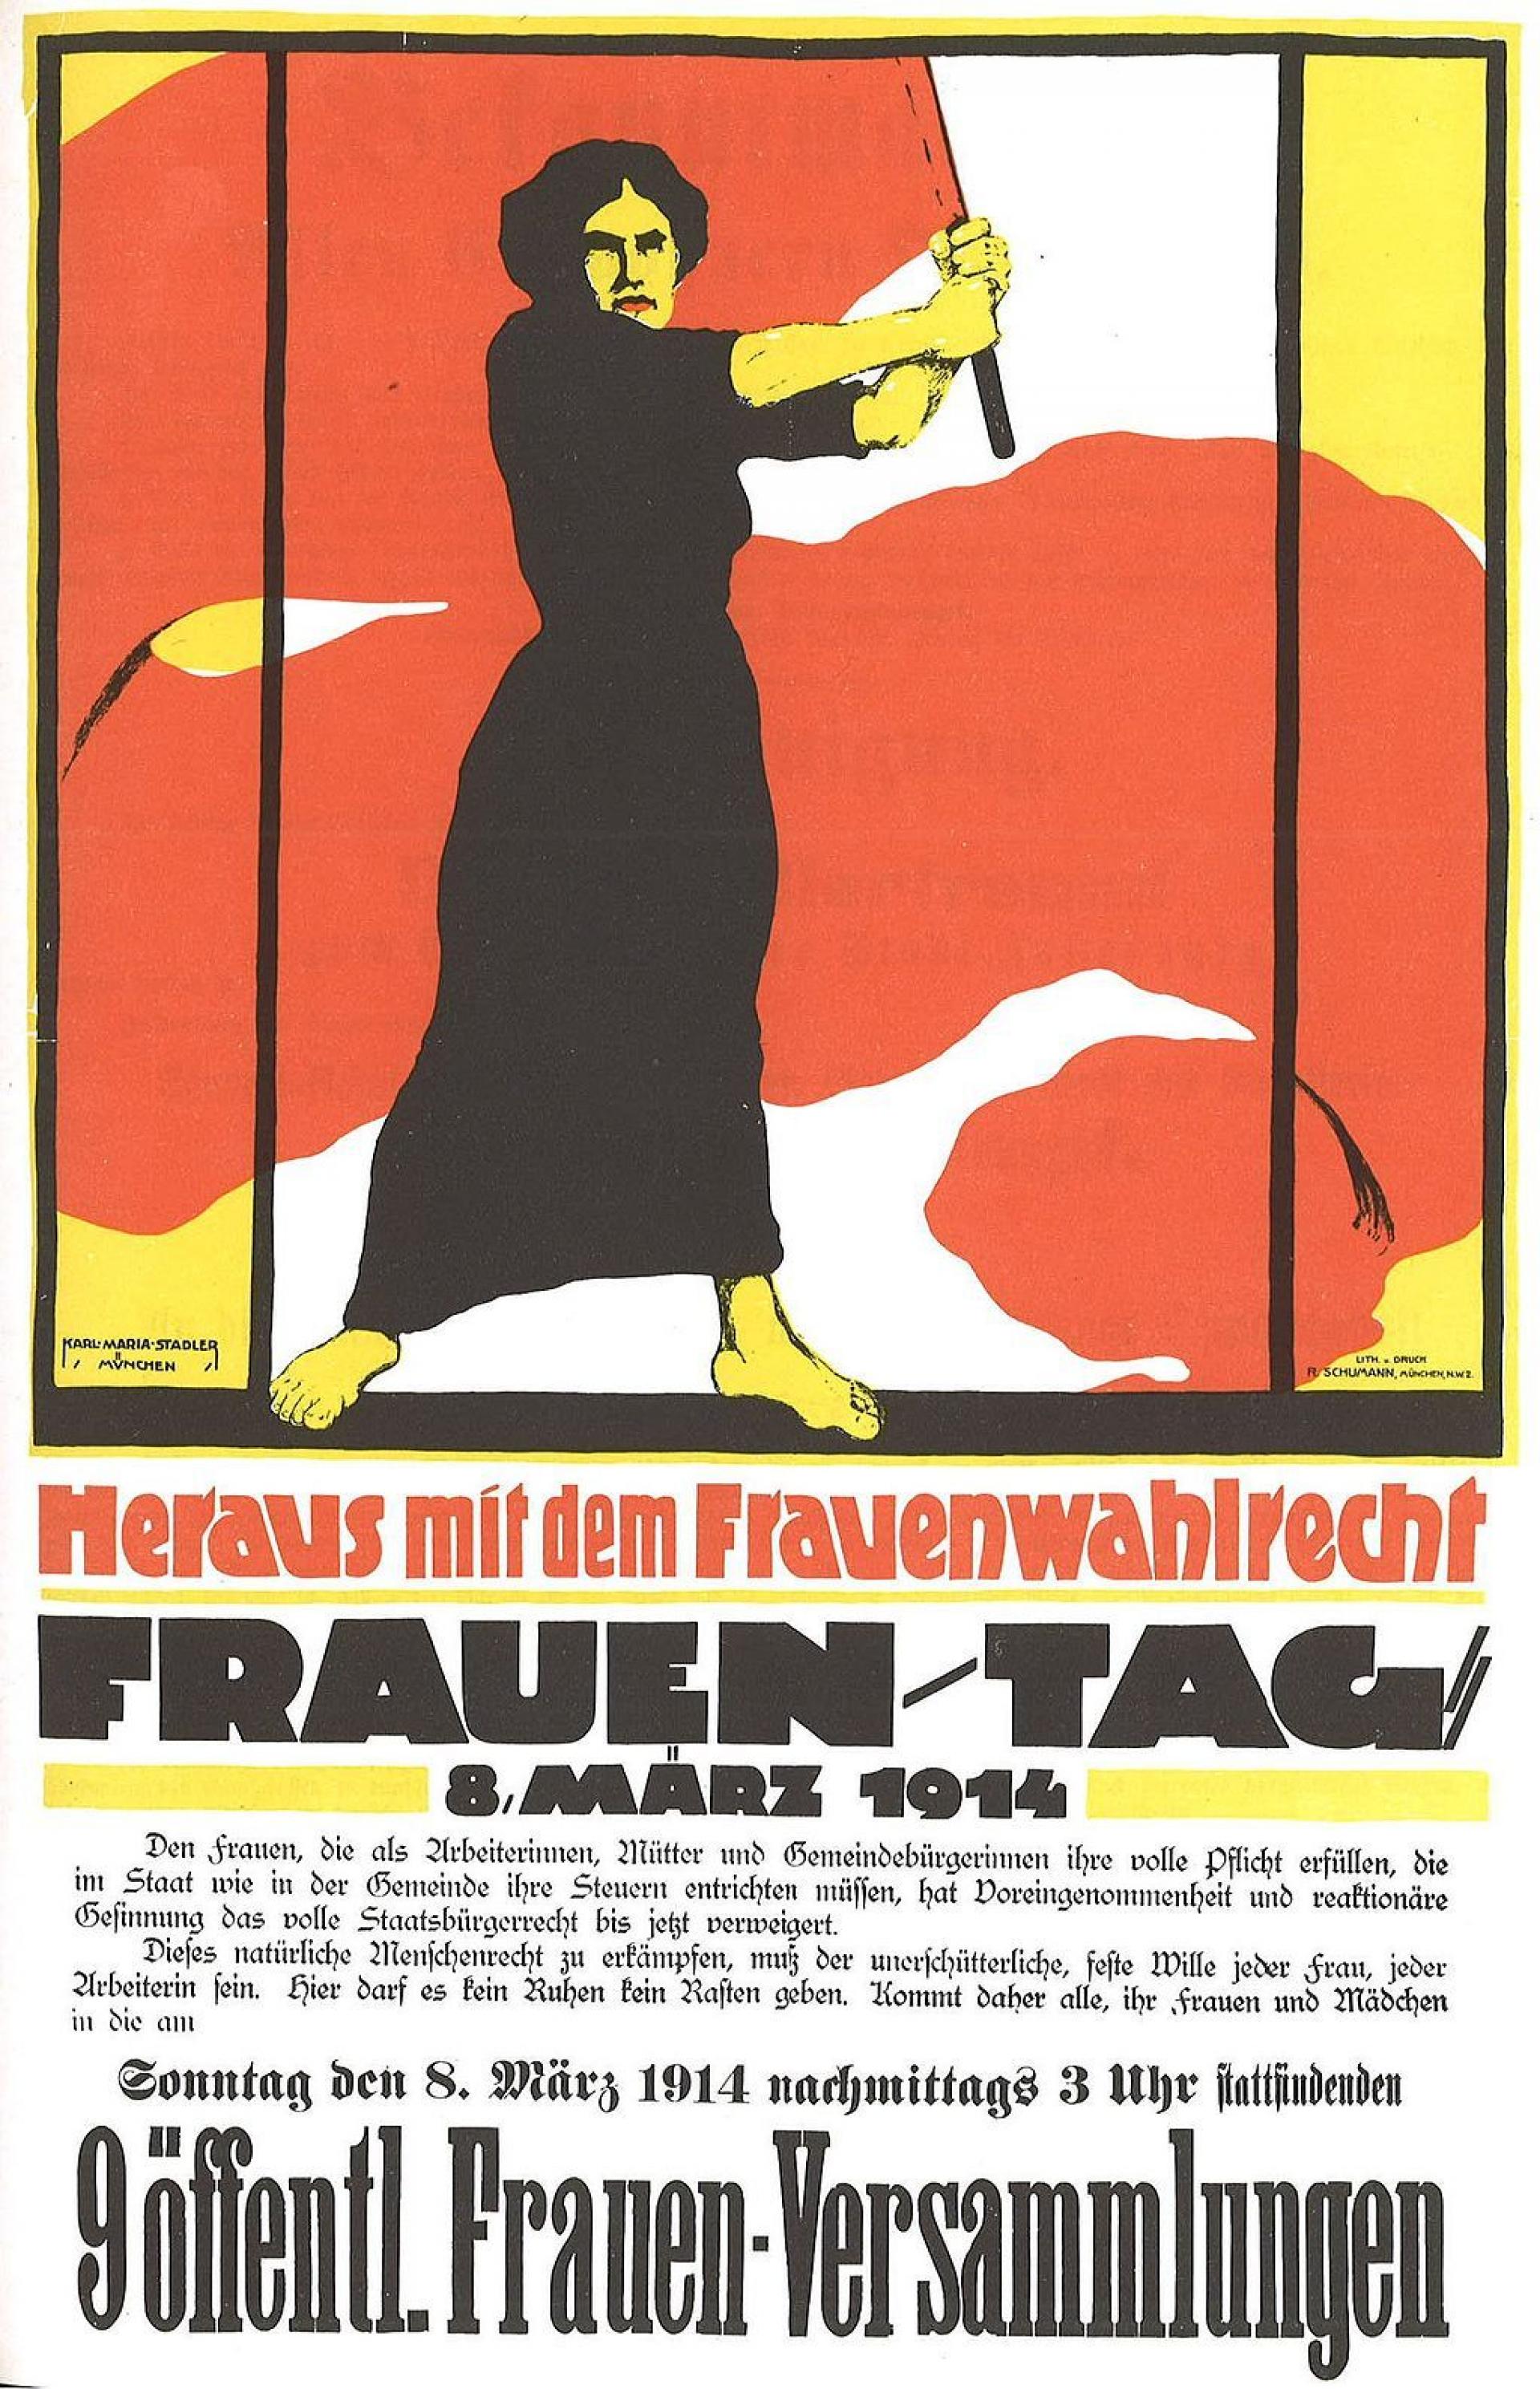 Poster celebrating the Women’s Day in Germany was banned in 1914.